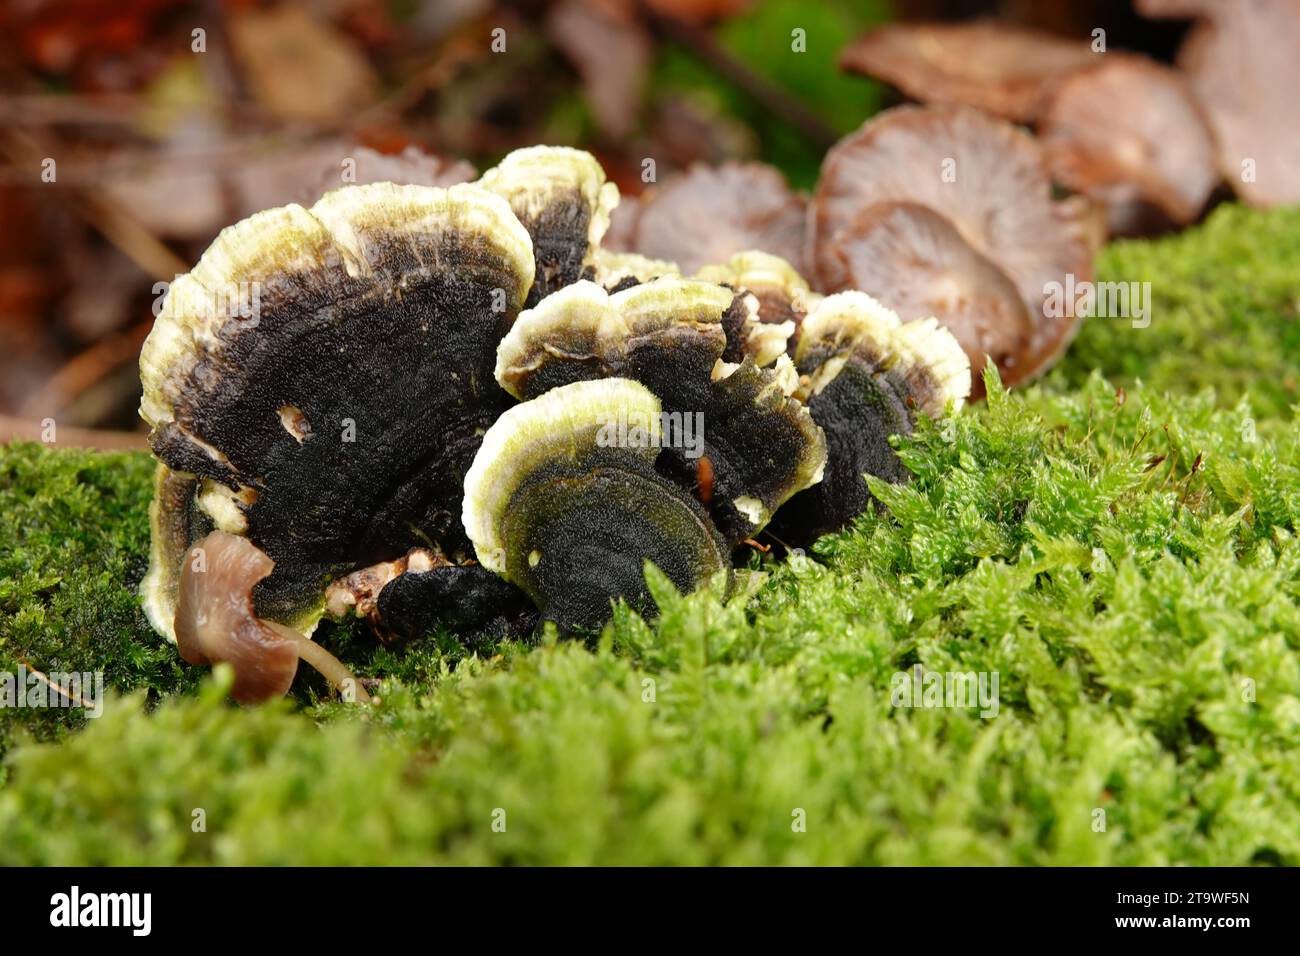 Natural closeup on a smoky polypore or bracket mushroom growing in between green moss on dead wood Stock Photo